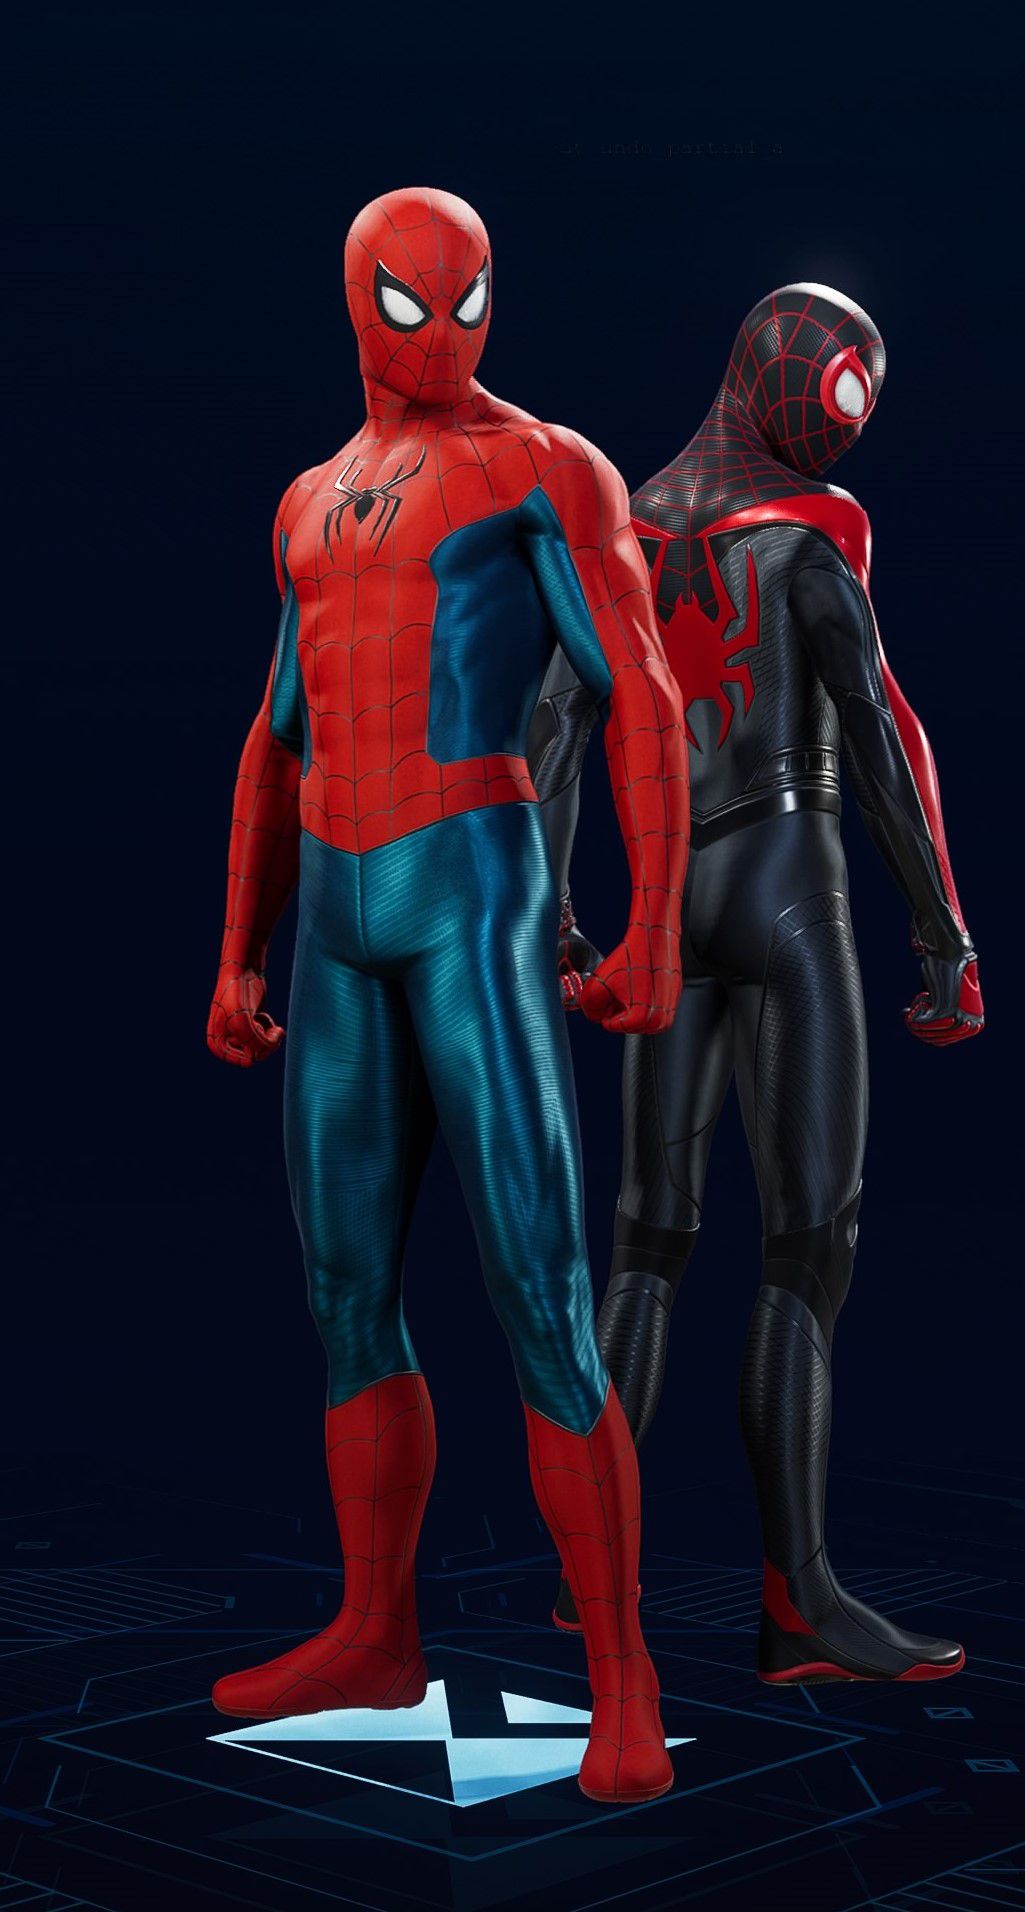 Peter Parker stands in his New Red and Blue Suit in the suit selection screen of Spider-Man 2.